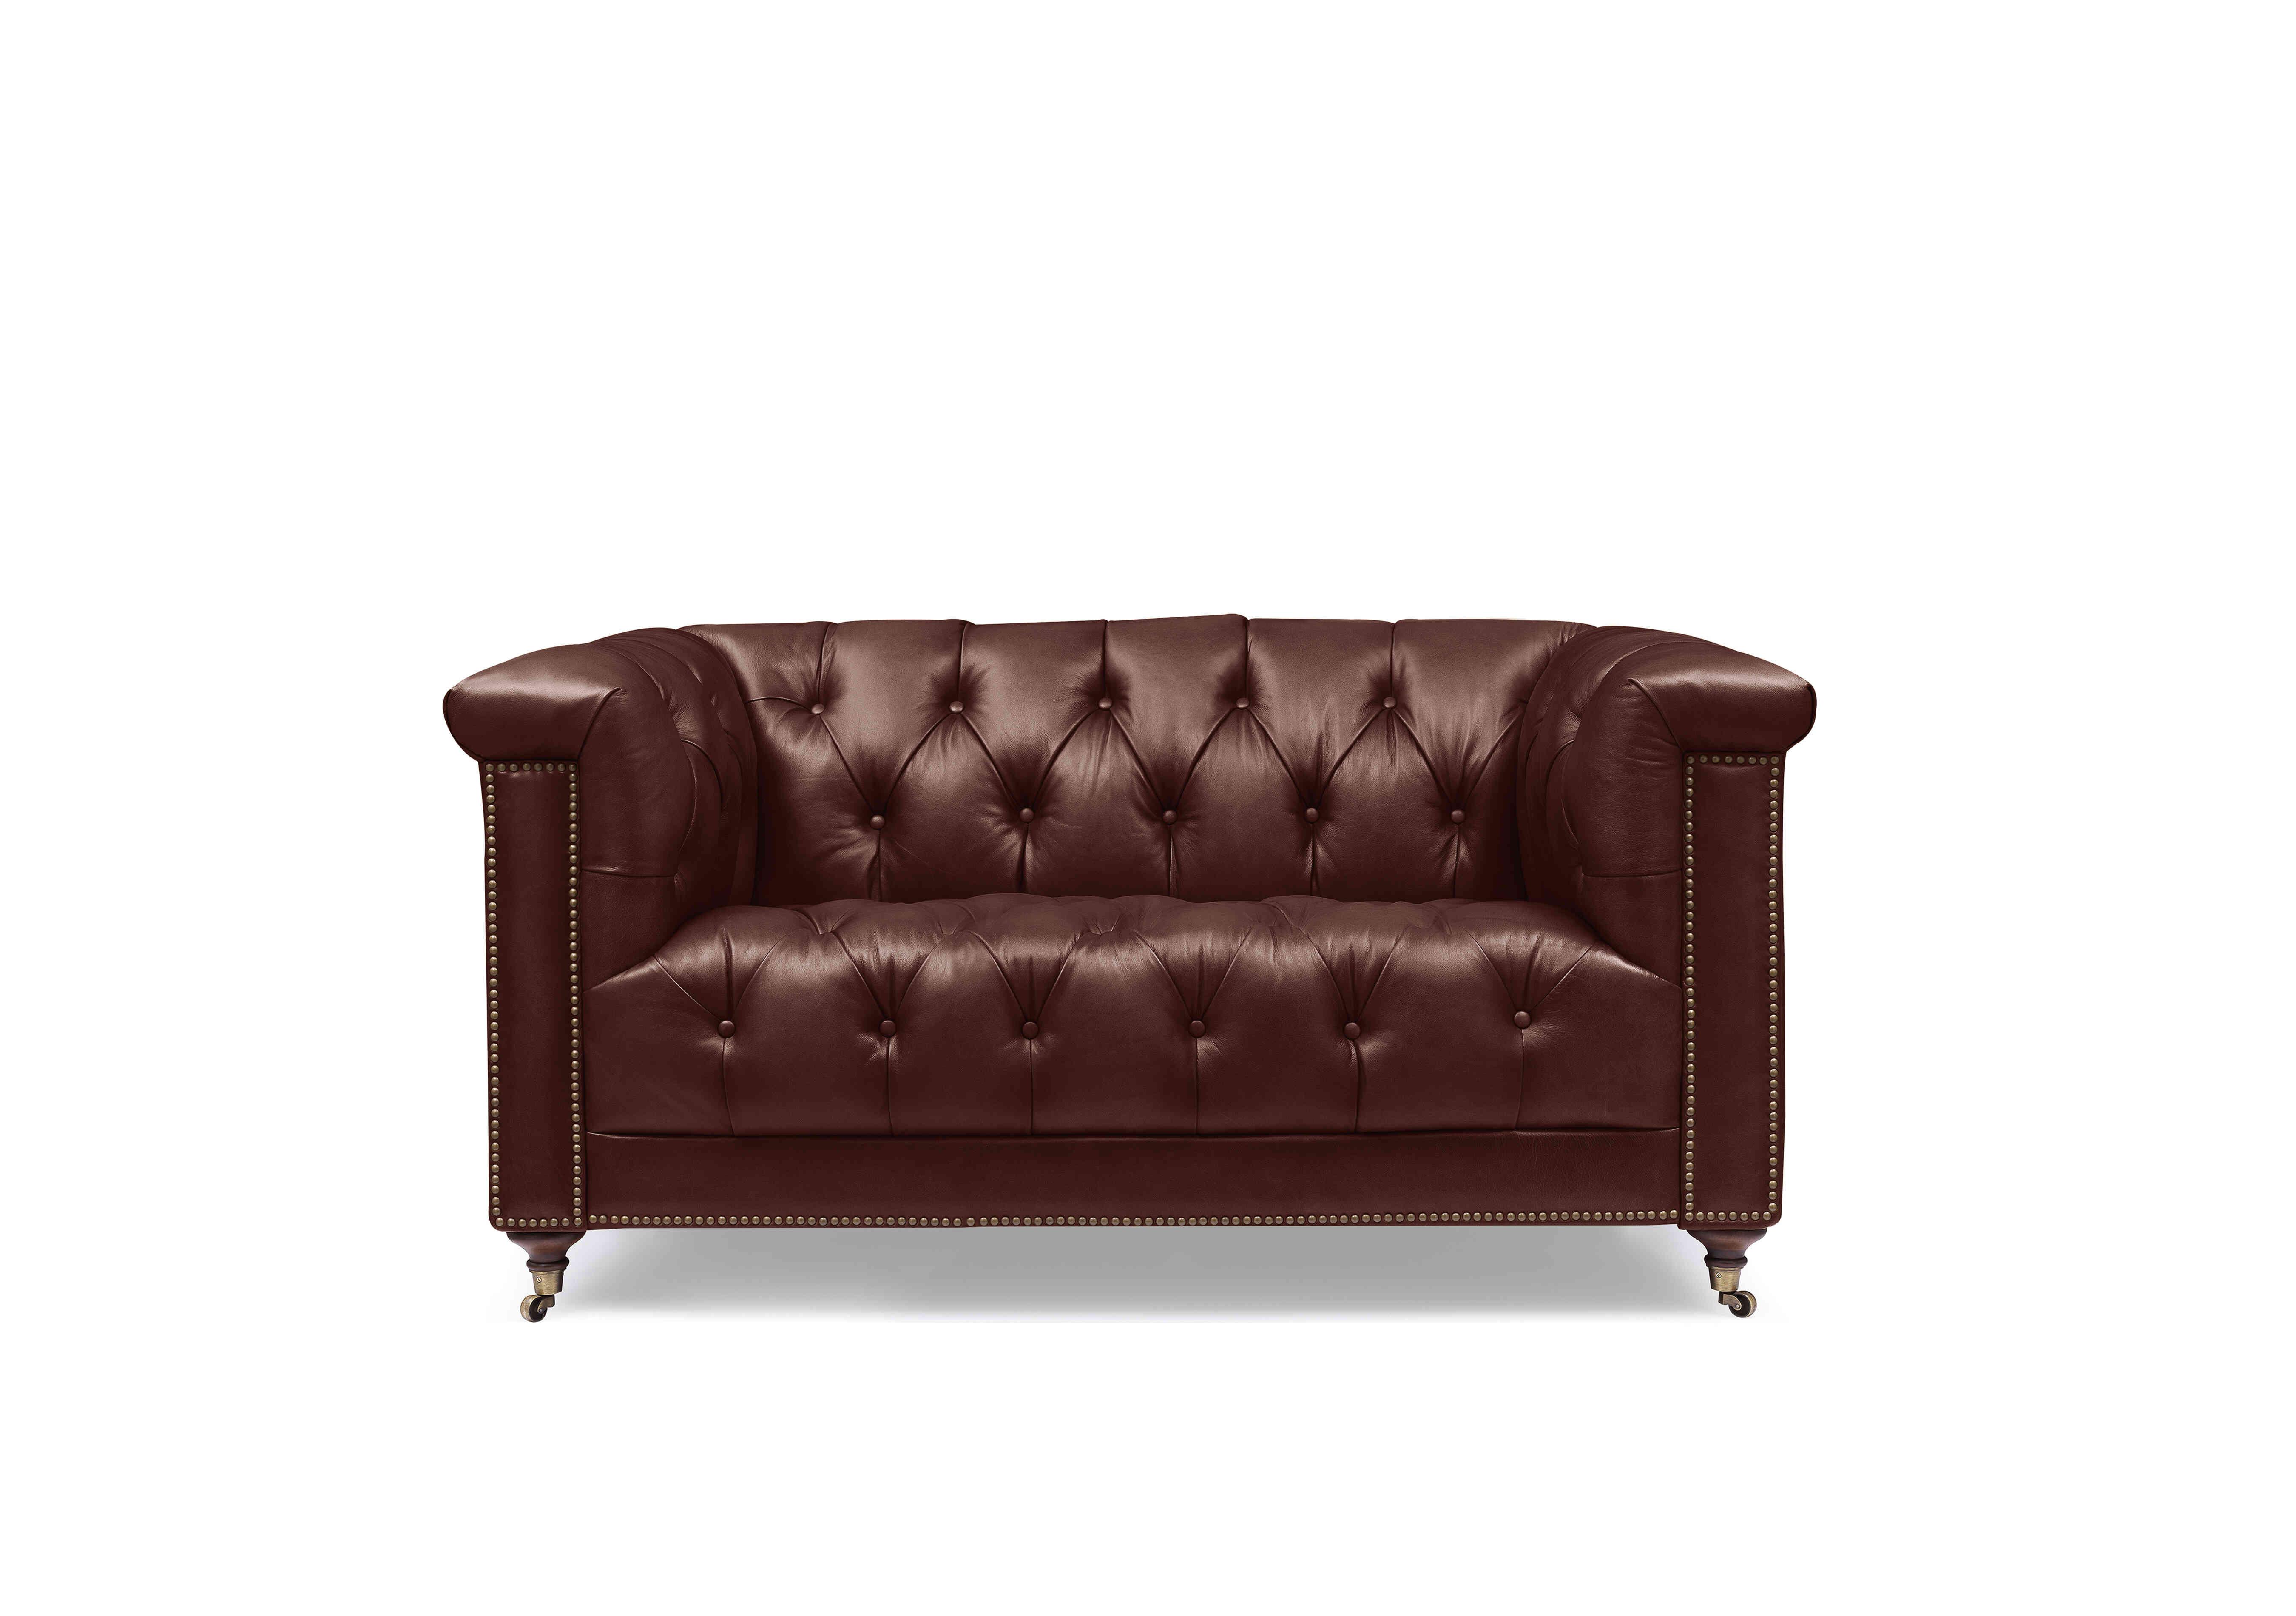 Wallace 2 Seater Leather Chesterfield Sofa in X3y1-1964ls Merlot on Furniture Village